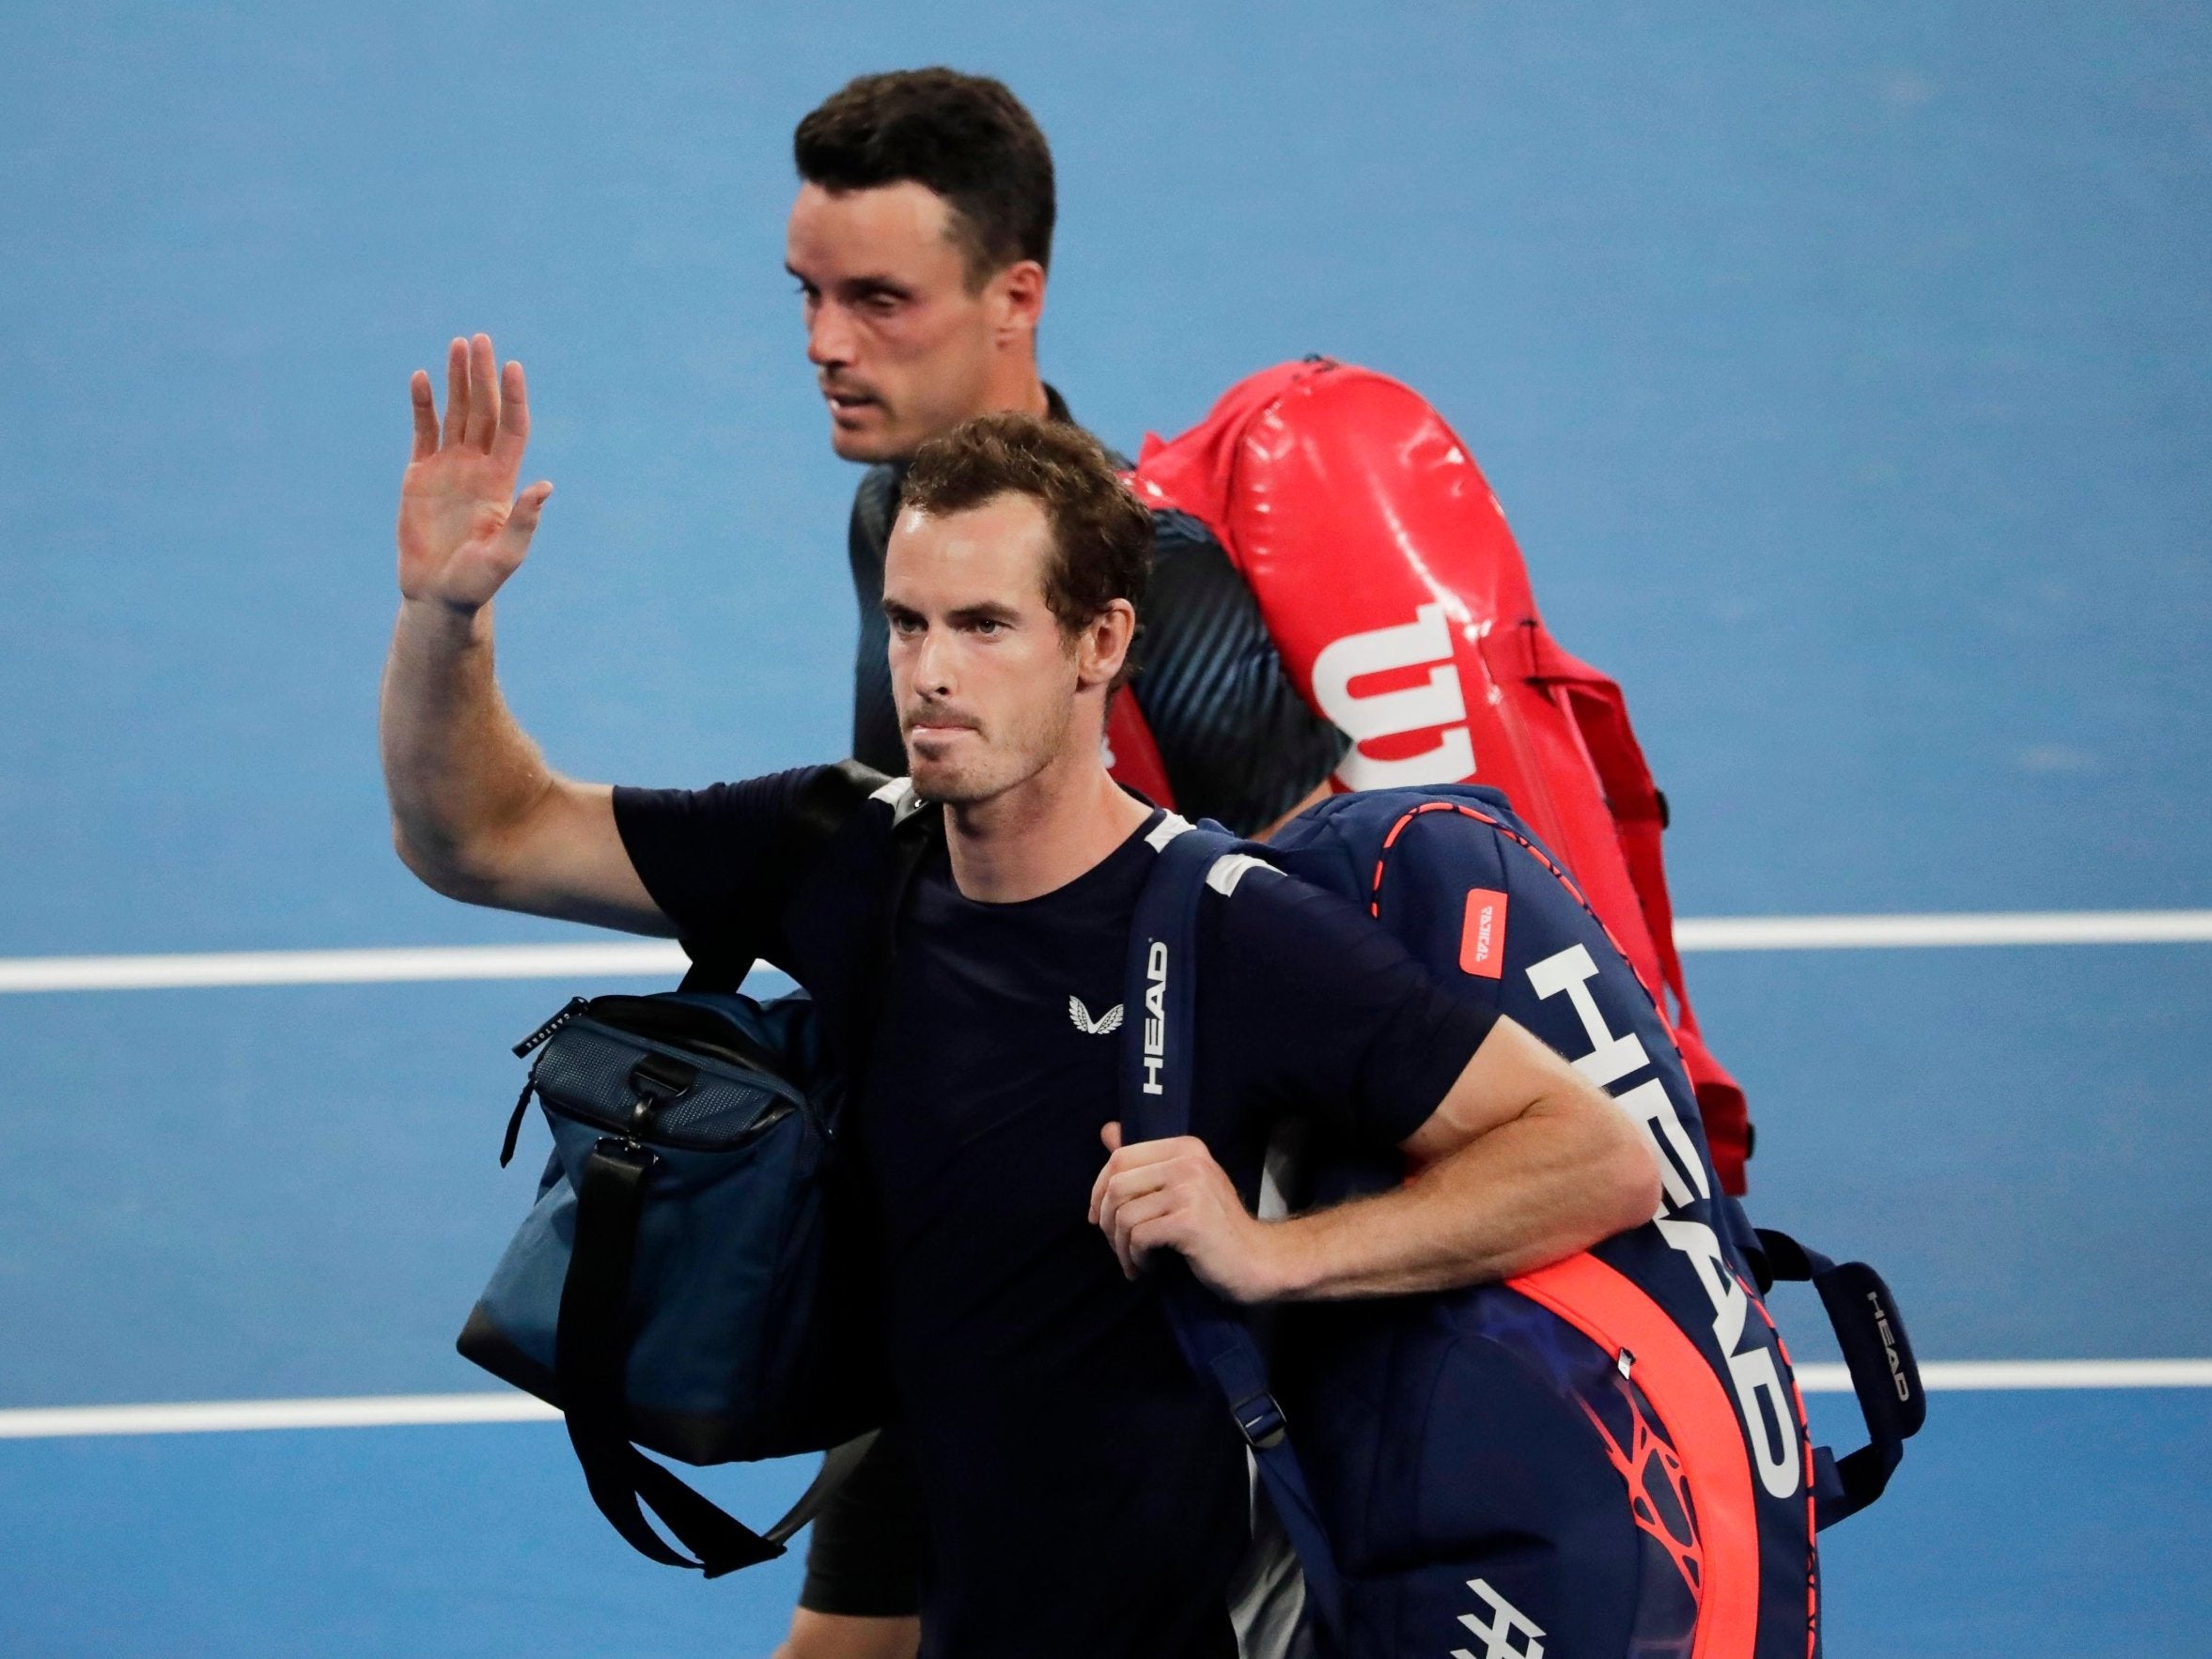 Murray played what could be his last match on Monday